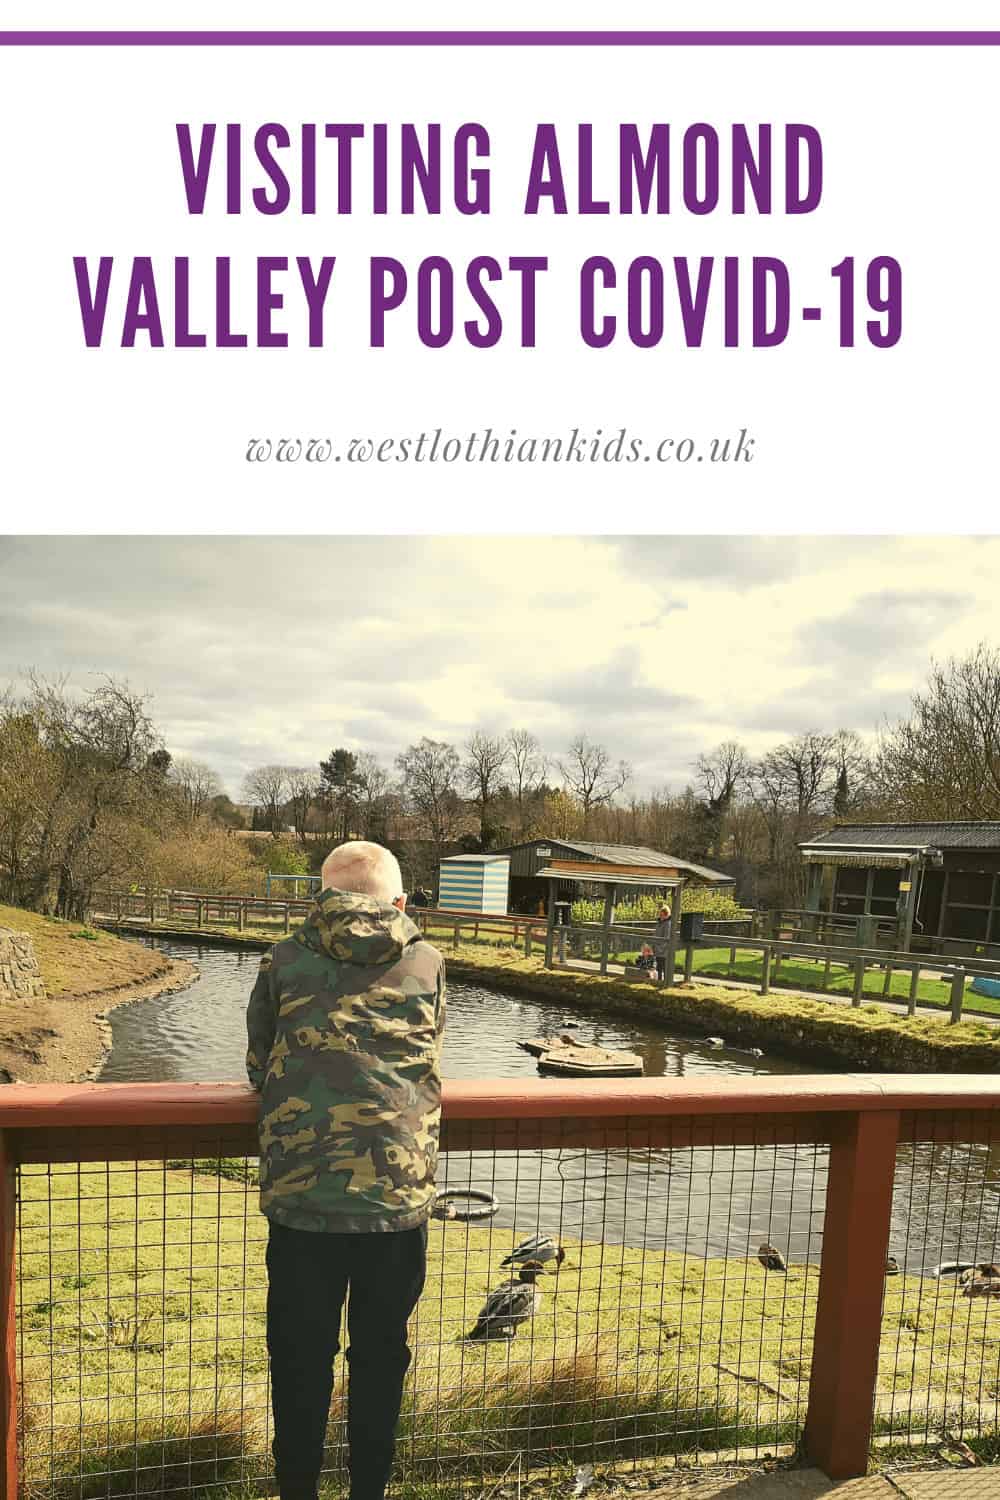 What you can expect from visiting Almond Valley post COVID-19